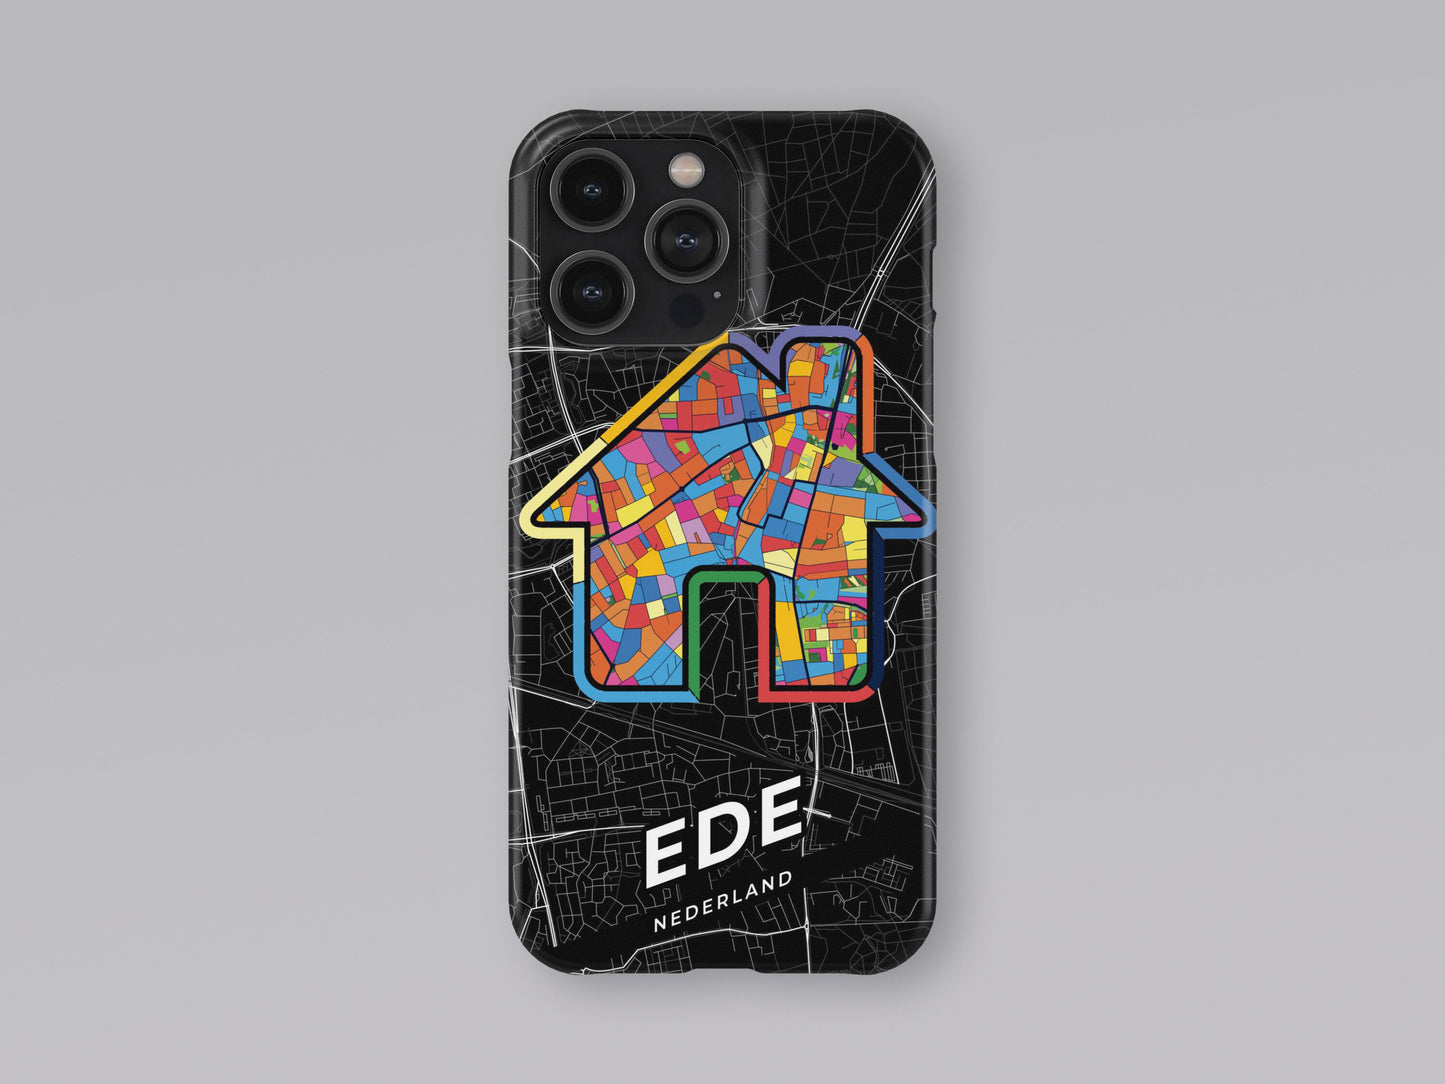 Ede Netherlands slim phone case with colorful icon. Birthday, wedding or housewarming gift. Couple match cases. 3